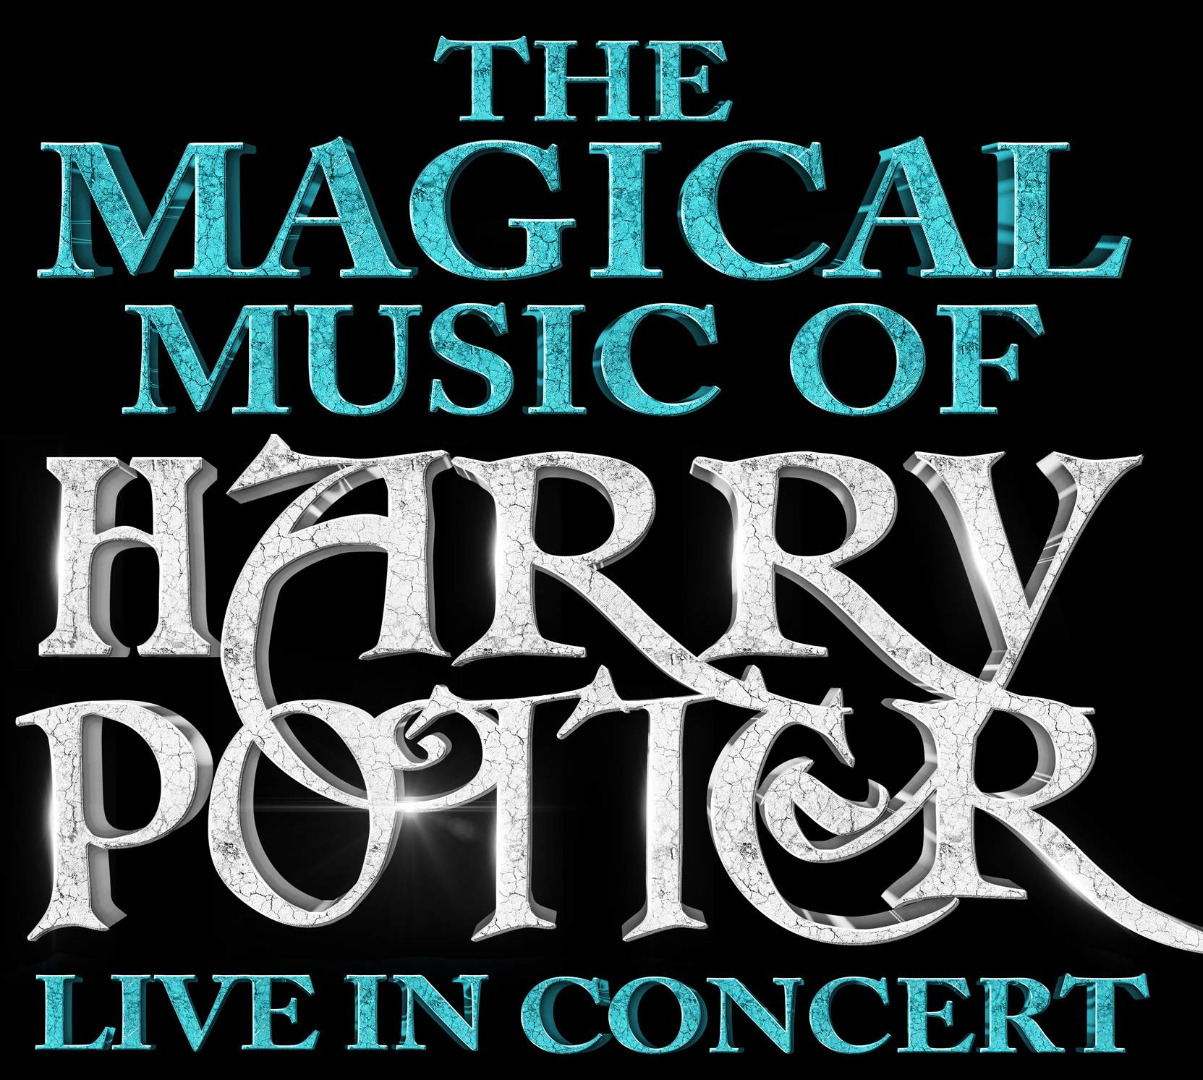 The Magical Music of Harry Potter 